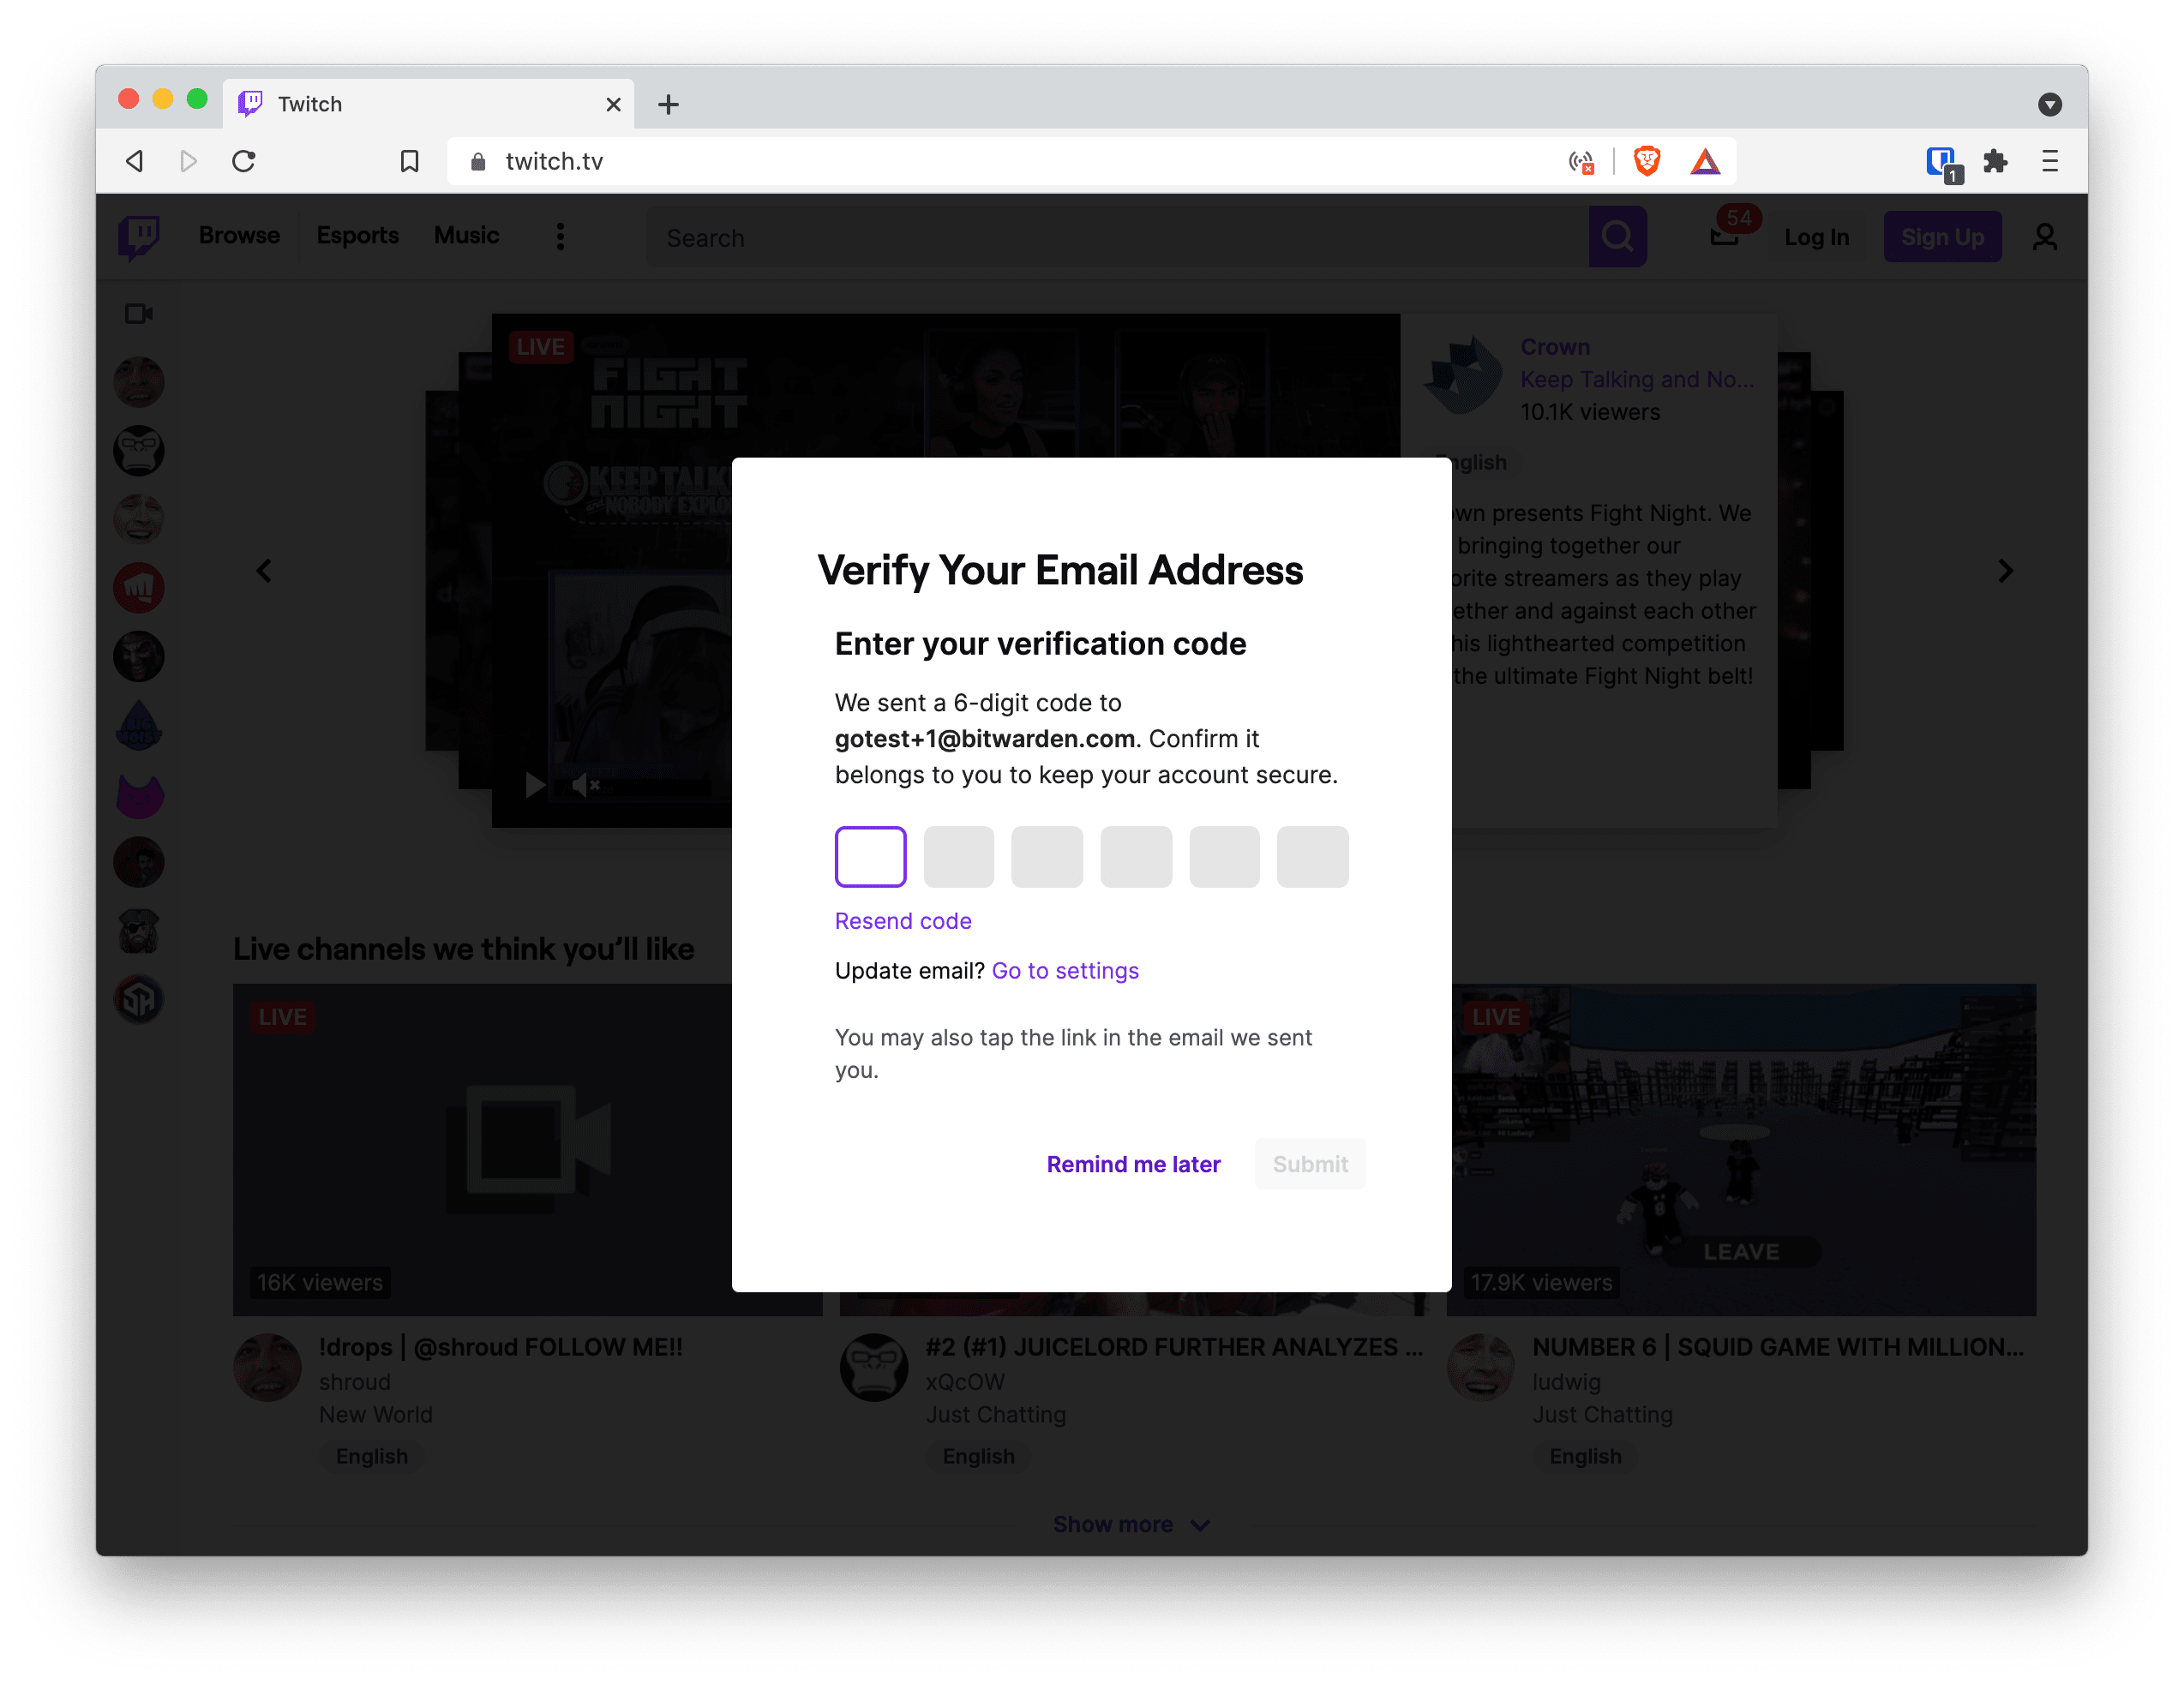 Enter in Twitch verification code